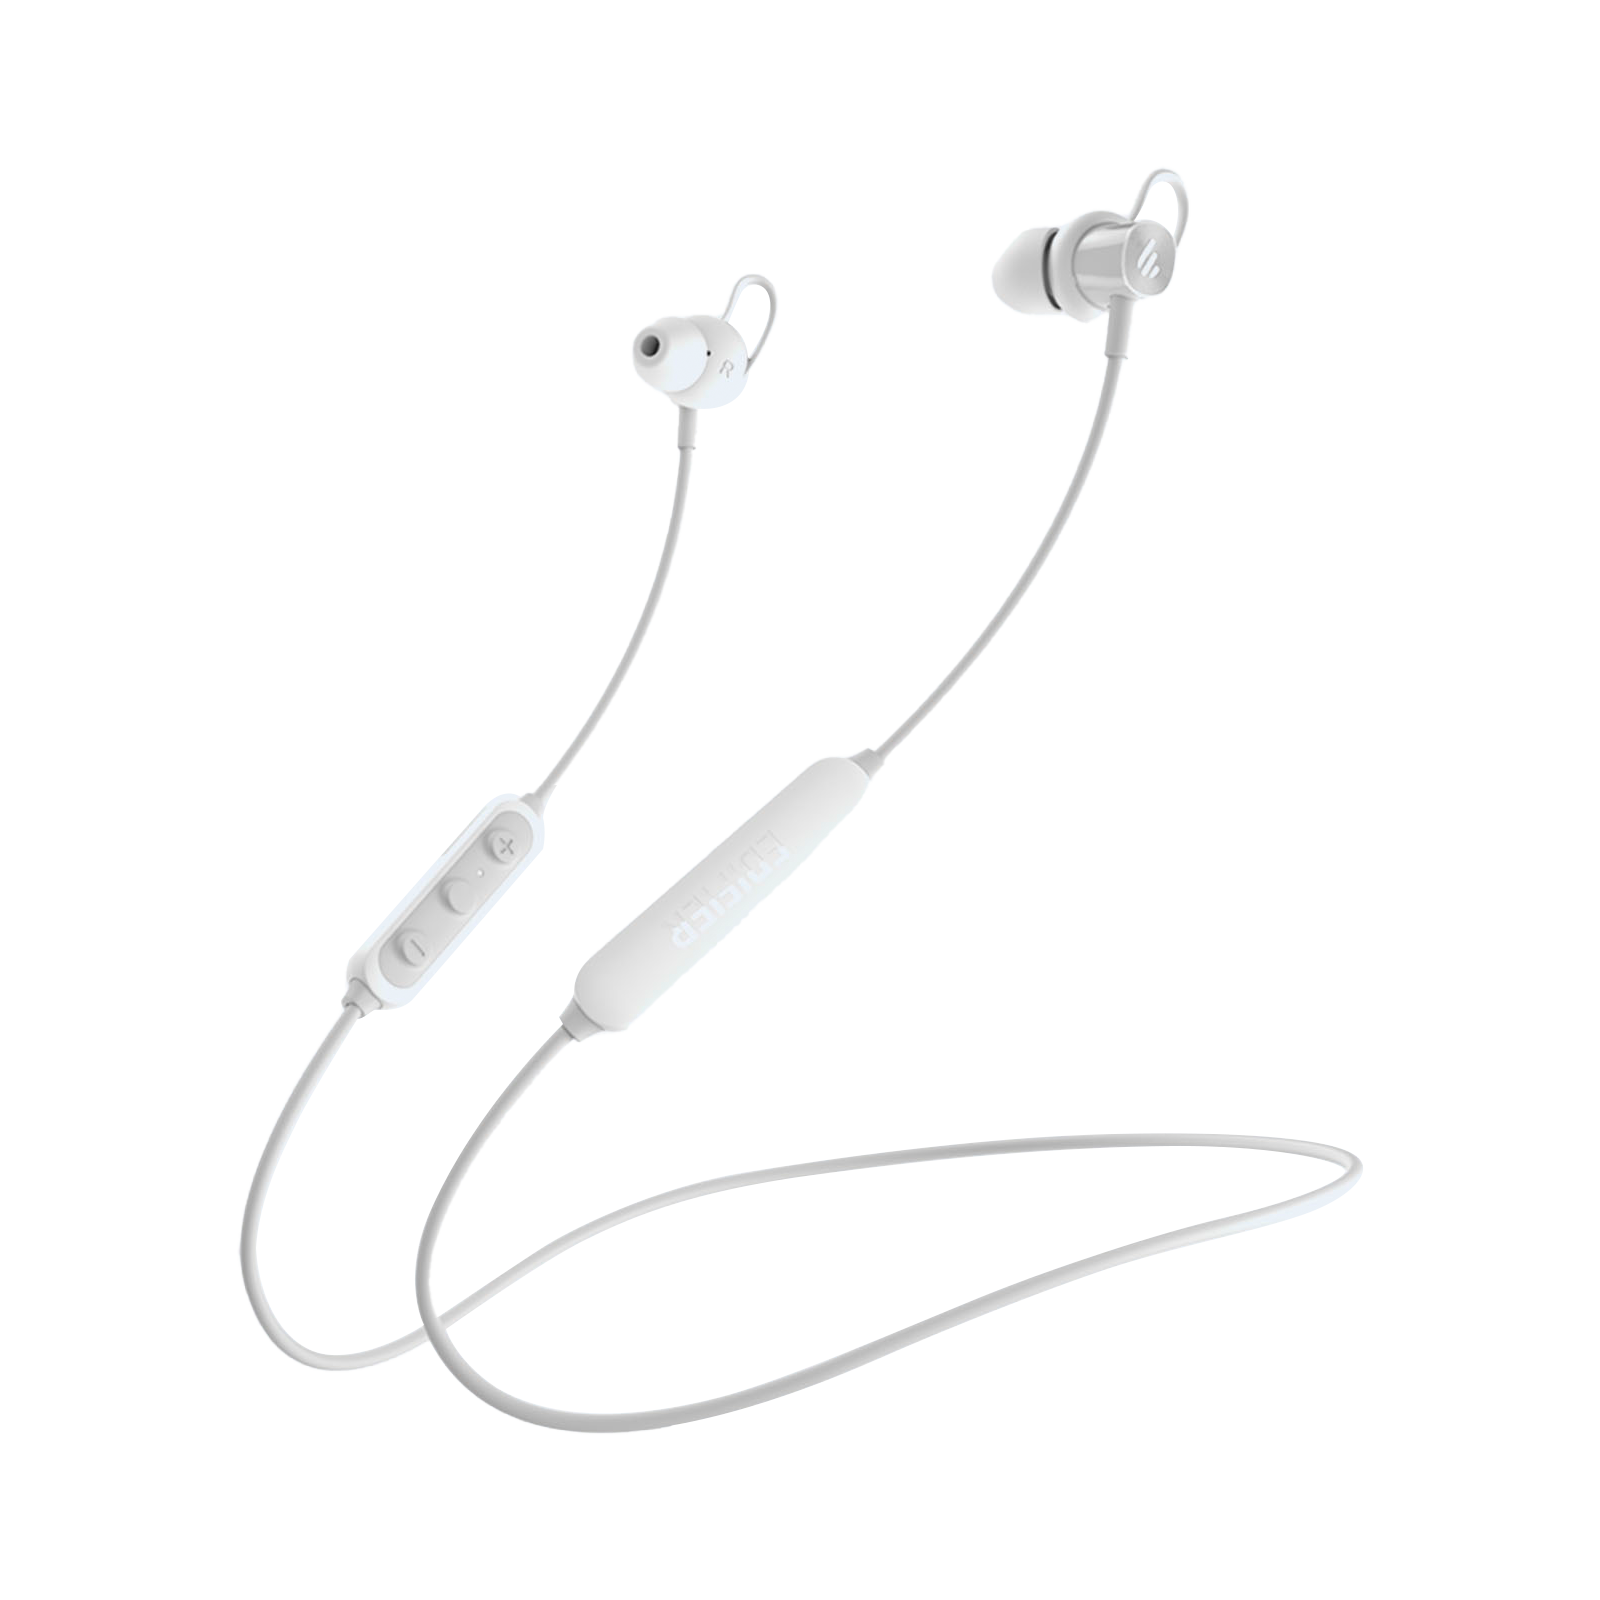 W200BT SE Water Resistant Sports In-Ear Earphones with Noise Suppression